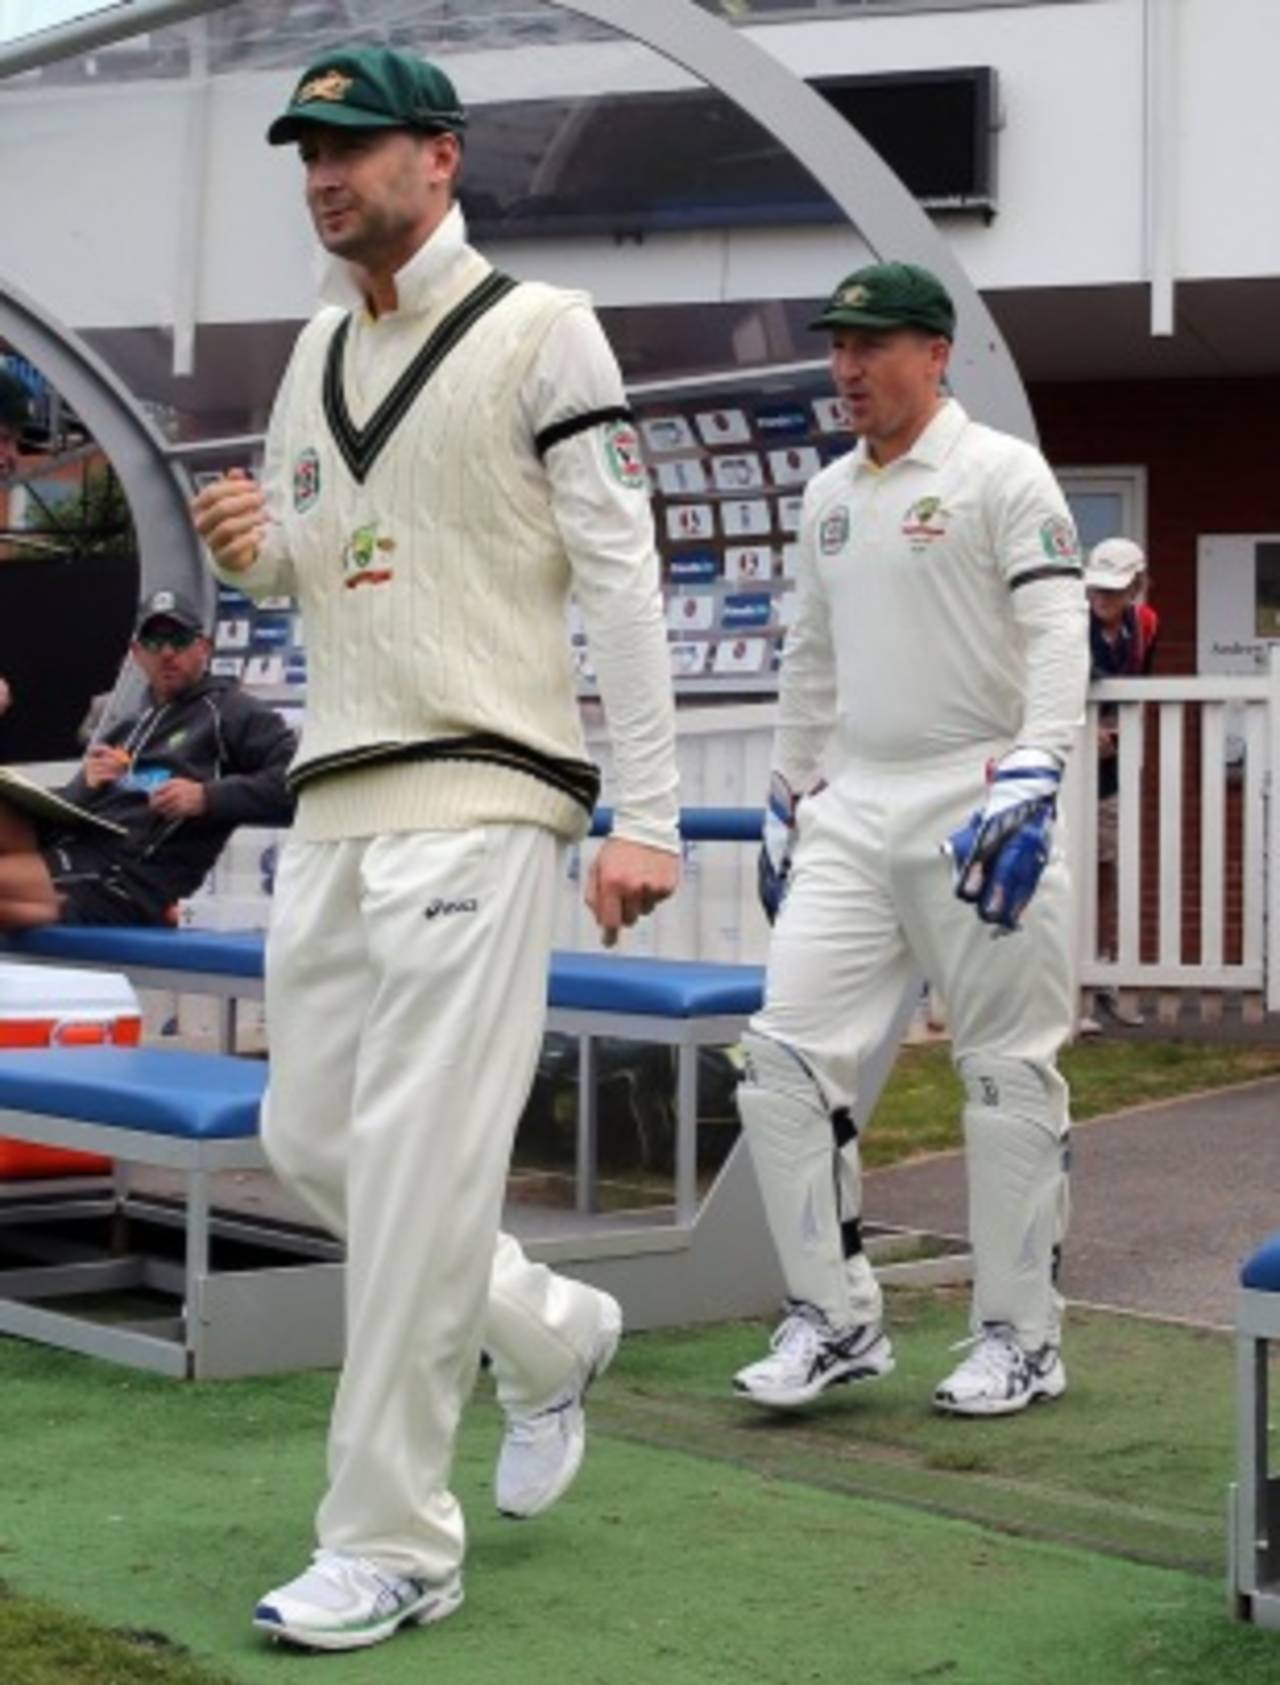 Michael Clarke leads his team out, Somerset v Australians, Taunton, 1st day, June 26, 2013